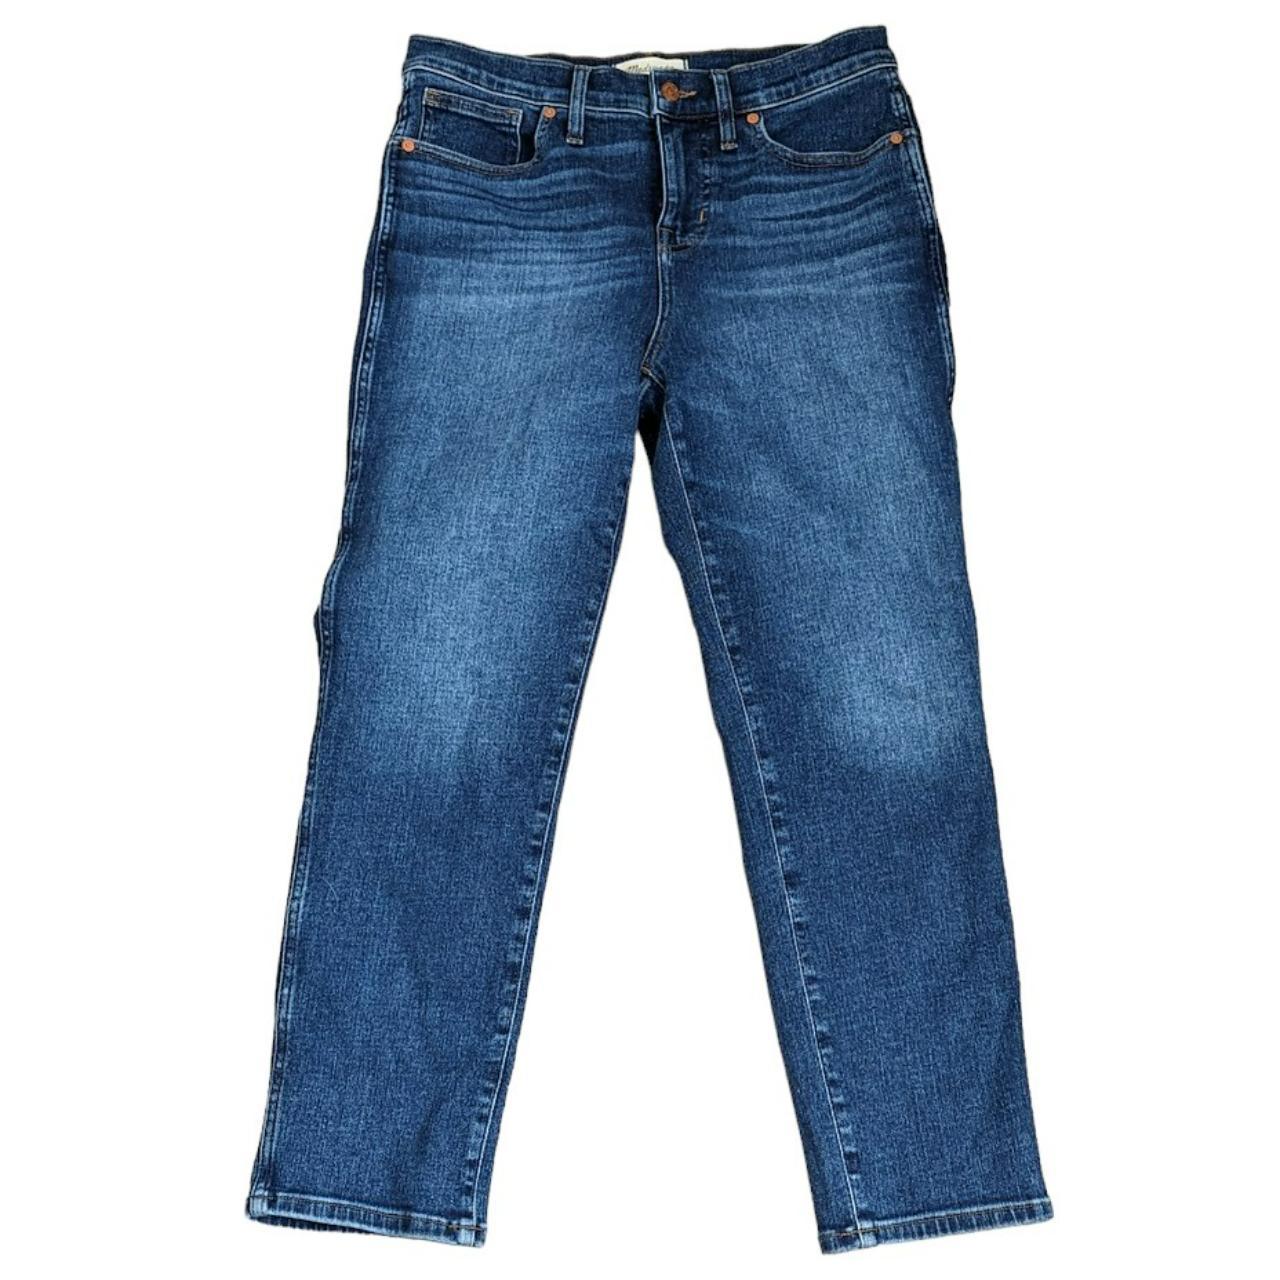 Madewell Stovepipe Jeans Straight Leg High Rise Blue... - Depop